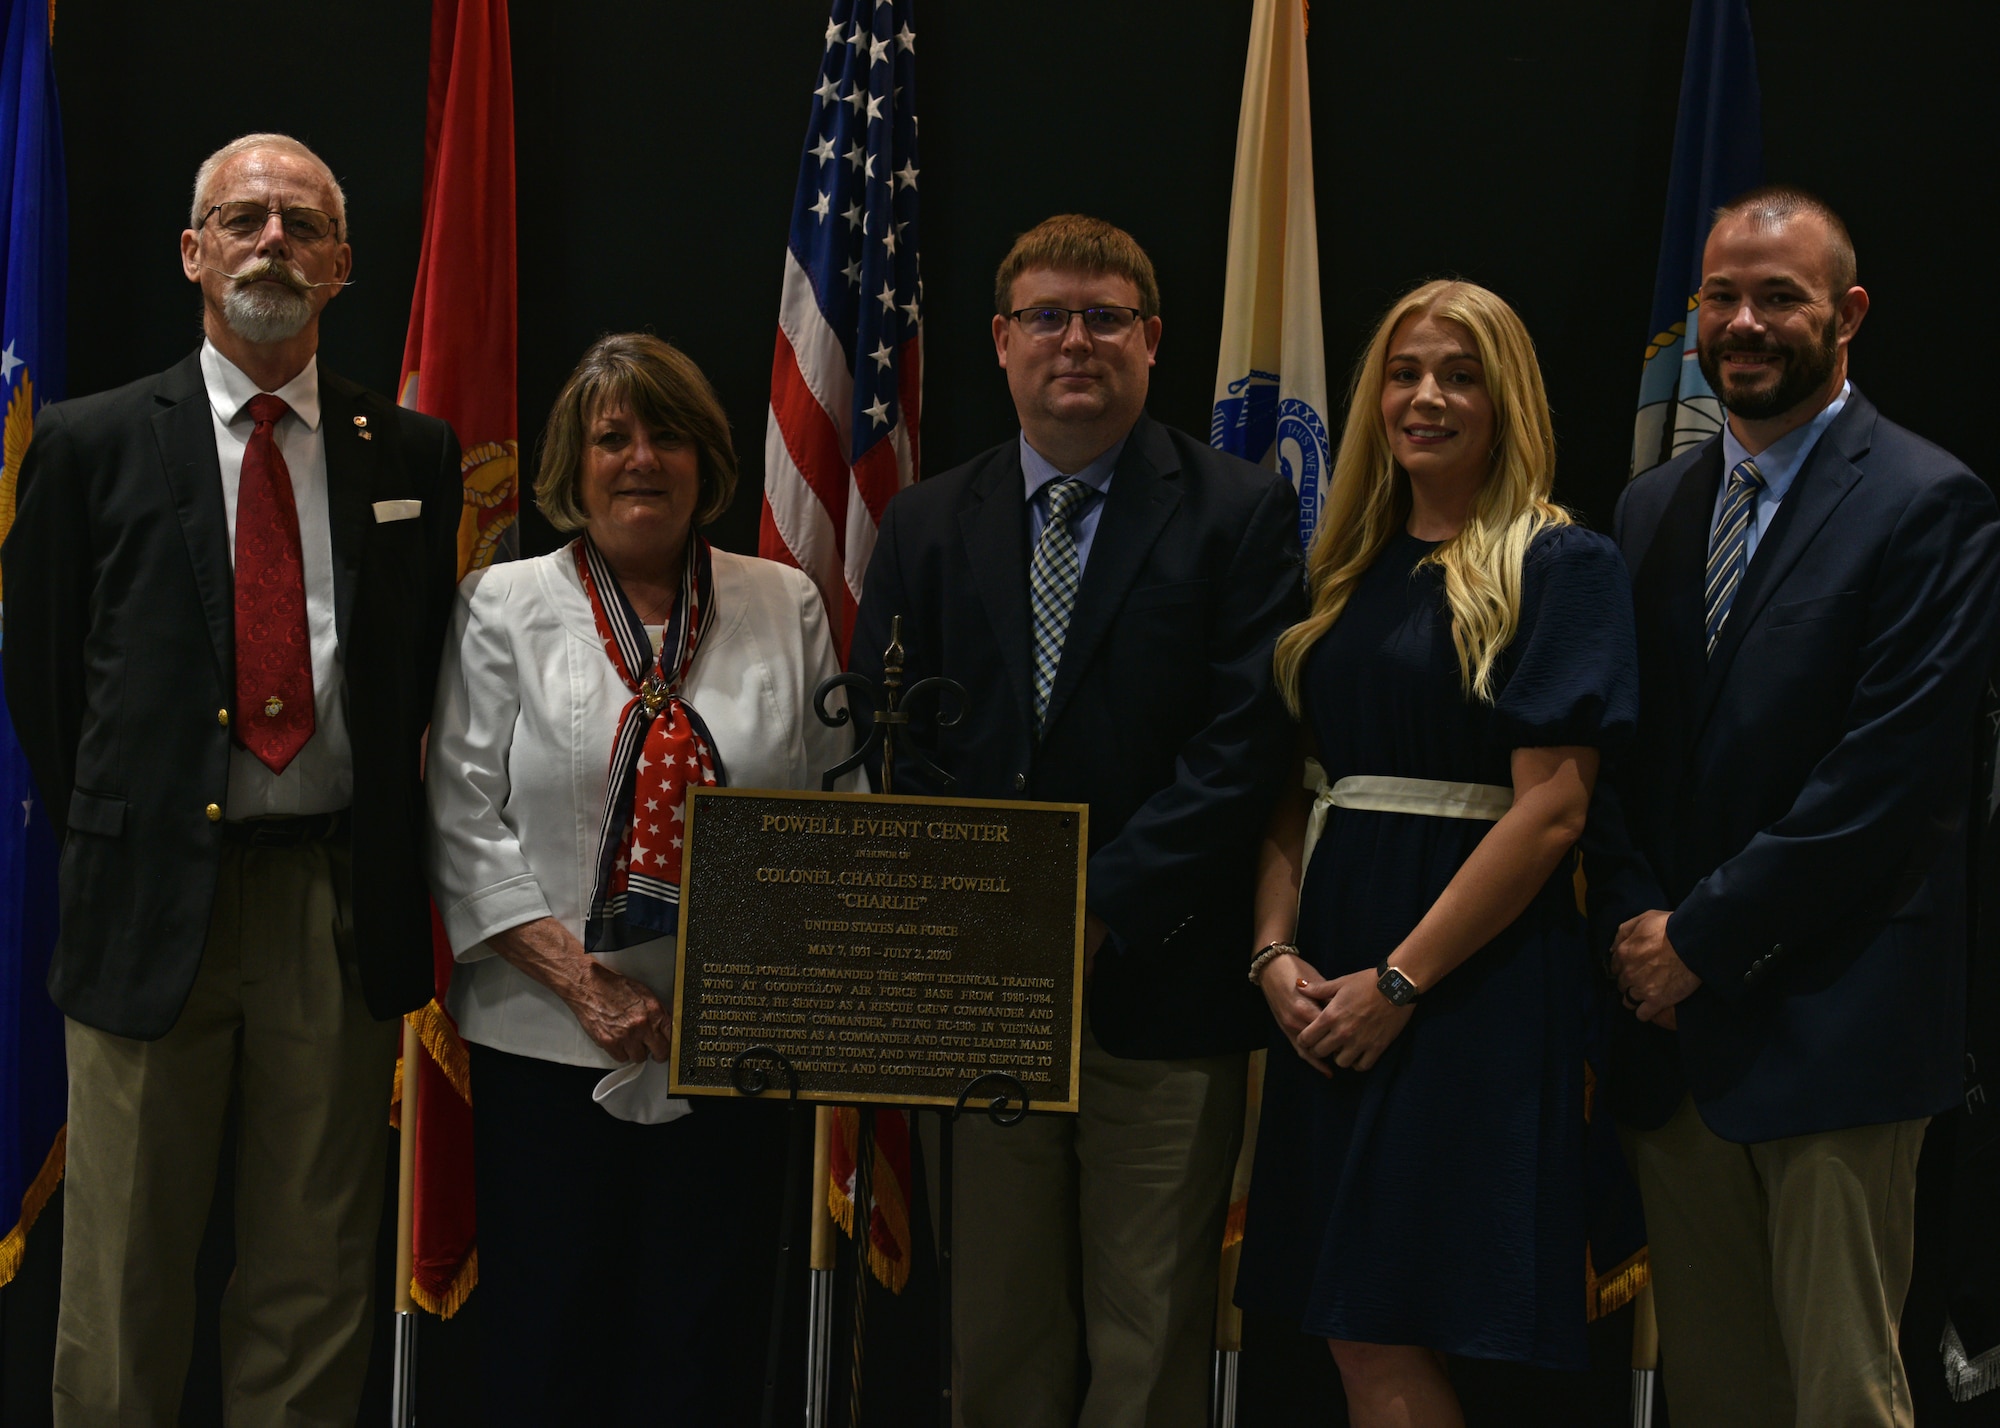 Family members of U.S. Air Force Retired Col. Charles E. Powell and JoAnne Powell, stand with the dedication plaque during the Powell Event Center dedication ceremony on Goodfellow Air Force Base, Sept. 10, 2021. Charles Powell was the commander of the 3480th Technical Training Wing at Goodfellow AFB from 1980-1984. (U.S. Air Force photo by Senior Airman Ashley Thrash)